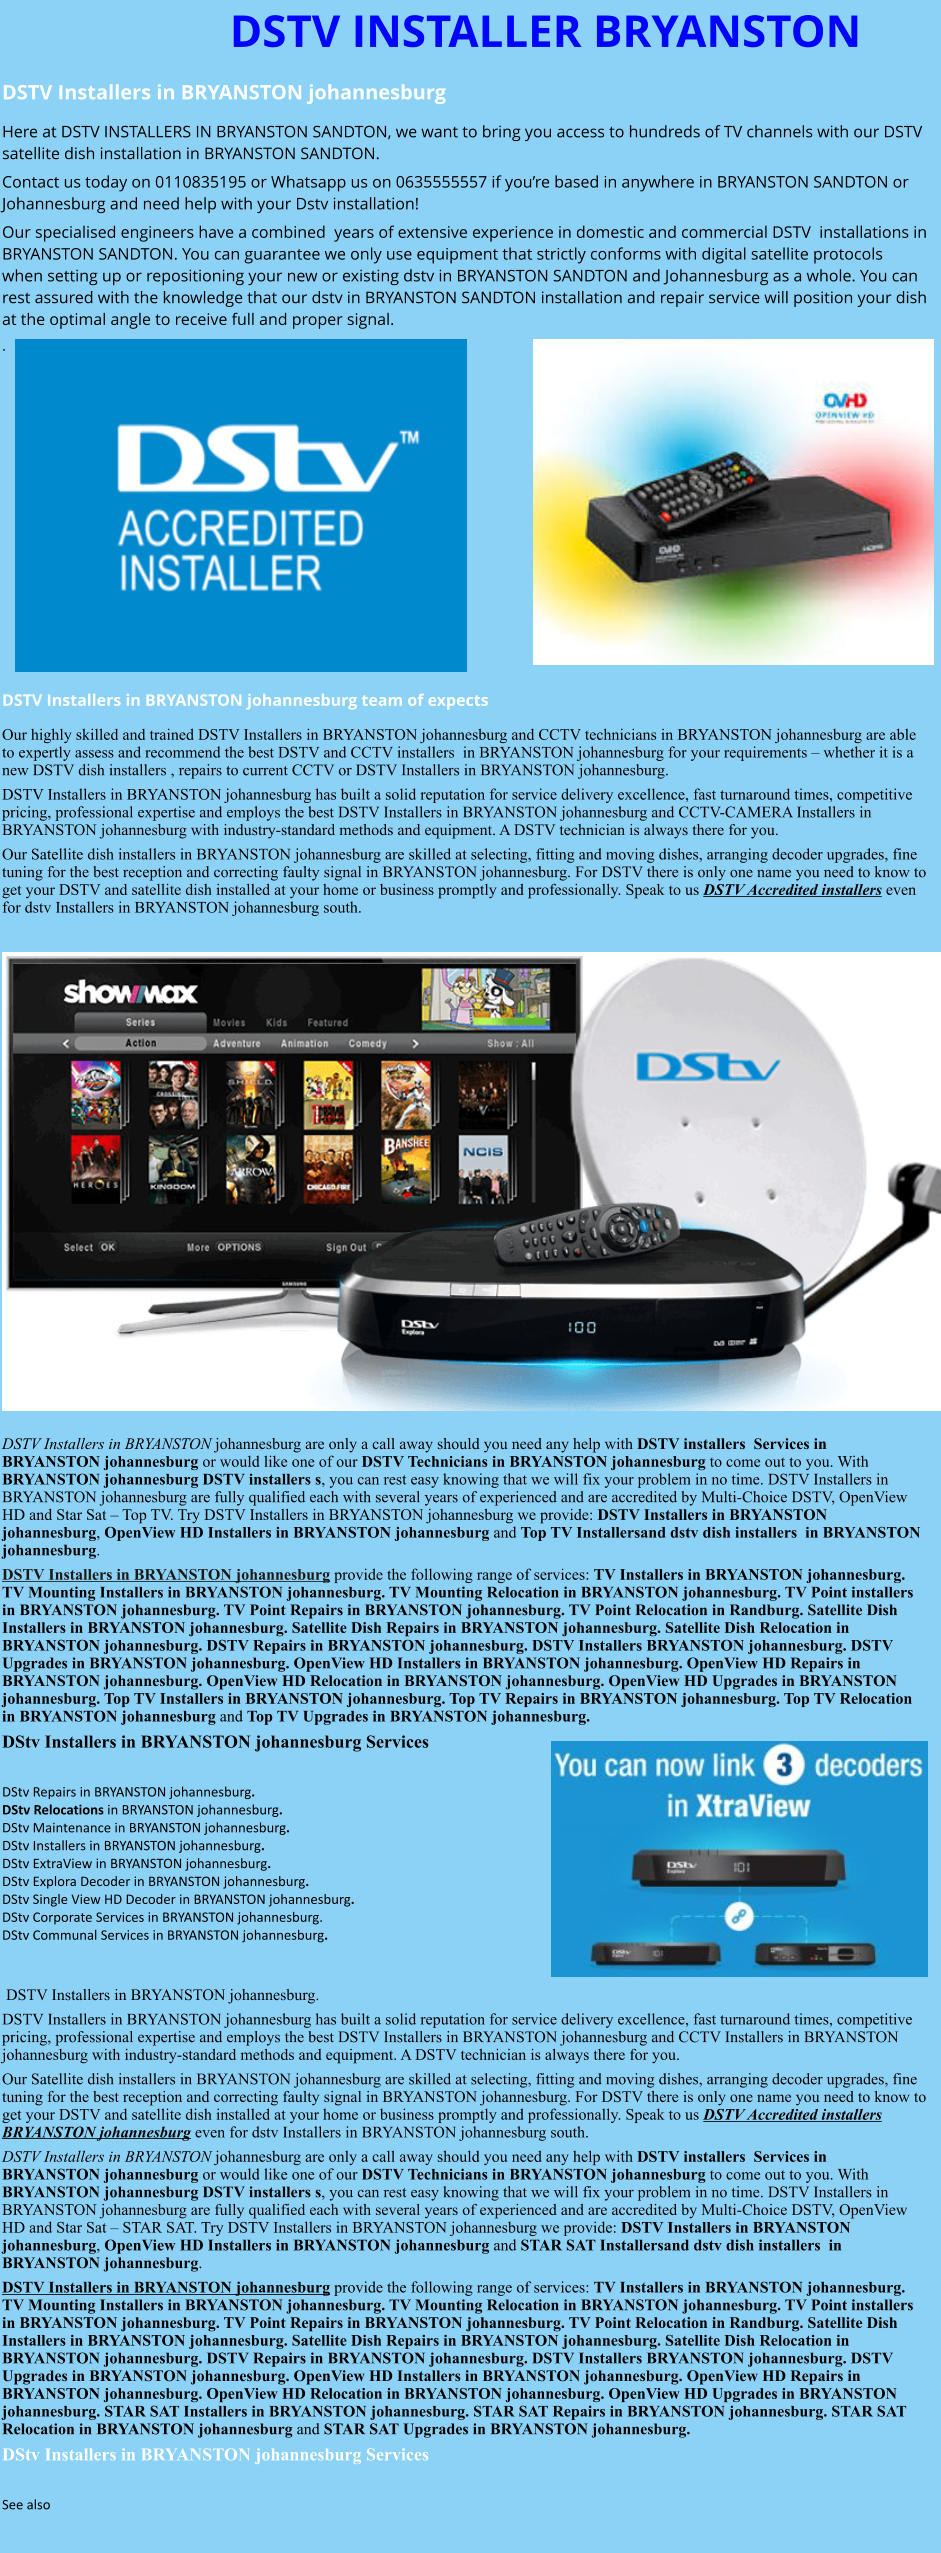 DSTV INSTALLER BRYANSTON DSTV Installers in BRYANSTON johannesburg  Here at DSTV INSTALLERS IN BRYANSTON SANDTON, we want to bring you access to hundreds of TV channels with our DSTV satellite dish installation in BRYANSTON SANDTON. Contact us today on 0110835195 or Whatsapp us on 0635555557 if you’re based in anywhere in BRYANSTON SANDTON or Johannesburg and need help with your Dstv installation! Our specialised engineers have a combined  years of extensive experience in domestic and commercial DSTV  installations in BRYANSTON SANDTON. You can guarantee we only use equipment that strictly conforms with digital satellite protocols when setting up or repositioning your new or existing dstv in BRYANSTON SANDTON and Johannesburg as a whole. You can rest assured with the knowledge that our dstv in BRYANSTON SANDTON installation and repair service will position your dish at the optimal angle to receive full and proper signal. .              DSTV Installers in BRYANSTON johannesburg team of expects Our highly skilled and trained DSTV Installers in BRYANSTON johannesburg and CCTV technicians in BRYANSTON johannesburg are able to expertly assess and recommend the best DSTV and CCTV installers  in BRYANSTON johannesburg for your requirements – whether it is a new DSTV dish installers , repairs to current CCTV or DSTV Installers in BRYANSTON johannesburg. DSTV Installers in BRYANSTON johannesburg has built a solid reputation for service delivery excellence, fast turnaround times, competitive pricing, professional expertise and employs the best DSTV Installers in BRYANSTON johannesburg and CCTV-CAMERA Installers in BRYANSTON johannesburg with industry-standard methods and equipment. A DSTV technician is always there for you. Our Satellite dish installers in BRYANSTON johannesburg are skilled at selecting, fitting and moving dishes, arranging decoder upgrades, fine tuning for the best reception and correcting faulty signal in BRYANSTON johannesburg. For DSTV there is only one name you need to know to get your DSTV and satellite dish installed at your home or business promptly and professionally. Speak to us DSTV Accredited installers even for dstv Installers in BRYANSTON johannesburg south.                      DSTV Installers in BRYANSTON johannesburg are only a call away should you need any help with DSTV installers  Services in BRYANSTON johannesburg or would like one of our DSTV Technicians in BRYANSTON johannesburg to come out to you. With BRYANSTON johannesburg DSTV installers s, you can rest easy knowing that we will fix your problem in no time. DSTV Installers in BRYANSTON johannesburg are fully qualified each with several years of experienced and are accredited by Multi-Choice DSTV, OpenView HD and Star Sat – Top TV. Try DSTV Installers in BRYANSTON johannesburg we provide: DSTV Installers in BRYANSTON johannesburg, OpenView HD Installers in BRYANSTON johannesburg and Top TV Installersand dstv dish installers  in BRYANSTON johannesburg. DSTV Installers in BRYANSTON johannesburg provide the following range of services: TV Installers in BRYANSTON johannesburg. TV Mounting Installers in BRYANSTON johannesburg. TV Mounting Relocation in BRYANSTON johannesburg. TV Point installers  in BRYANSTON johannesburg. TV Point Repairs in BRYANSTON johannesburg. TV Point Relocation in Randburg. Satellite Dish Installers in BRYANSTON johannesburg. Satellite Dish Repairs in BRYANSTON johannesburg. Satellite Dish Relocation in BRYANSTON johannesburg. DSTV Repairs in BRYANSTON johannesburg. DSTV Installers BRYANSTON johannesburg. DSTV Upgrades in BRYANSTON johannesburg. OpenView HD Installers in BRYANSTON johannesburg. OpenView HD Repairs in BRYANSTON johannesburg. OpenView HD Relocation in BRYANSTON johannesburg. OpenView HD Upgrades in BRYANSTON johannesburg. Top TV Installers in BRYANSTON johannesburg. Top TV Repairs in BRYANSTON johannesburg. Top TV Relocation in BRYANSTON johannesburg and Top TV Upgrades in BRYANSTON johannesburg. DStv Installers in BRYANSTON johannesburg Services  DStv Repairs in BRYANSTON johannesburg.  DStv Relocations in BRYANSTON johannesburg.  DStv Maintenance in BRYANSTON johannesburg. DStv Installers in BRYANSTON johannesburg. DStv ExtraView in BRYANSTON johannesburg. DStv Explora Decoder in BRYANSTON johannesburg. DStv Single View HD Decoder in BRYANSTON johannesburg. DStv Corporate Services in BRYANSTON johannesburg. DStv Communal Services in BRYANSTON johannesburg.    DSTV Installers in BRYANSTON johannesburg. DSTV Installers in BRYANSTON johannesburg has built a solid reputation for service delivery excellence, fast turnaround times, competitive pricing, professional expertise and employs the best DSTV Installers in BRYANSTON johannesburg and CCTV Installers in BRYANSTON johannesburg with industry-standard methods and equipment. A DSTV technician is always there for you. Our Satellite dish installers in BRYANSTON johannesburg are skilled at selecting, fitting and moving dishes, arranging decoder upgrades, fine tuning for the best reception and correcting faulty signal in BRYANSTON johannesburg. For DSTV there is only one name you need to know to get your DSTV and satellite dish installed at your home or business promptly and professionally. Speak to us DSTV Accredited installers BRYANSTON johannesburg even for dstv Installers in BRYANSTON johannesburg south. DSTV Installers in BRYANSTON johannesburg are only a call away should you need any help with DSTV installers  Services in BRYANSTON johannesburg or would like one of our DSTV Technicians in BRYANSTON johannesburg to come out to you. With BRYANSTON johannesburg DSTV installers s, you can rest easy knowing that we will fix your problem in no time. DSTV Installers in BRYANSTON johannesburg are fully qualified each with several years of experienced and are accredited by Multi-Choice DSTV, OpenView HD and Star Sat – STAR SAT. Try DSTV Installers in BRYANSTON johannesburg we provide: DSTV Installers in BRYANSTON johannesburg, OpenView HD Installers in BRYANSTON johannesburg and STAR SAT Installersand dstv dish installers  in BRYANSTON johannesburg. DSTV Installers in BRYANSTON johannesburg provide the following range of services: TV Installers in BRYANSTON johannesburg. TV Mounting Installers in BRYANSTON johannesburg. TV Mounting Relocation in BRYANSTON johannesburg. TV Point installers  in BRYANSTON johannesburg. TV Point Repairs in BRYANSTON johannesburg. TV Point Relocation in Randburg. Satellite Dish Installers in BRYANSTON johannesburg. Satellite Dish Repairs in BRYANSTON johannesburg. Satellite Dish Relocation in BRYANSTON johannesburg. DSTV Repairs in BRYANSTON johannesburg. DSTV Installers BRYANSTON johannesburg. DSTV Upgrades in BRYANSTON johannesburg. OpenView HD Installers in BRYANSTON johannesburg. OpenView HD Repairs in BRYANSTON johannesburg. OpenView HD Relocation in BRYANSTON johannesburg. OpenView HD Upgrades in BRYANSTON johannesburg. STAR SAT Installers in BRYANSTON johannesburg. STAR SAT Repairs in BRYANSTON johannesburg. STAR SAT Relocation in BRYANSTON johannesburg and STAR SAT Upgrades in BRYANSTON johannesburg. DStv Installers in BRYANSTON johannesburg Services  See also